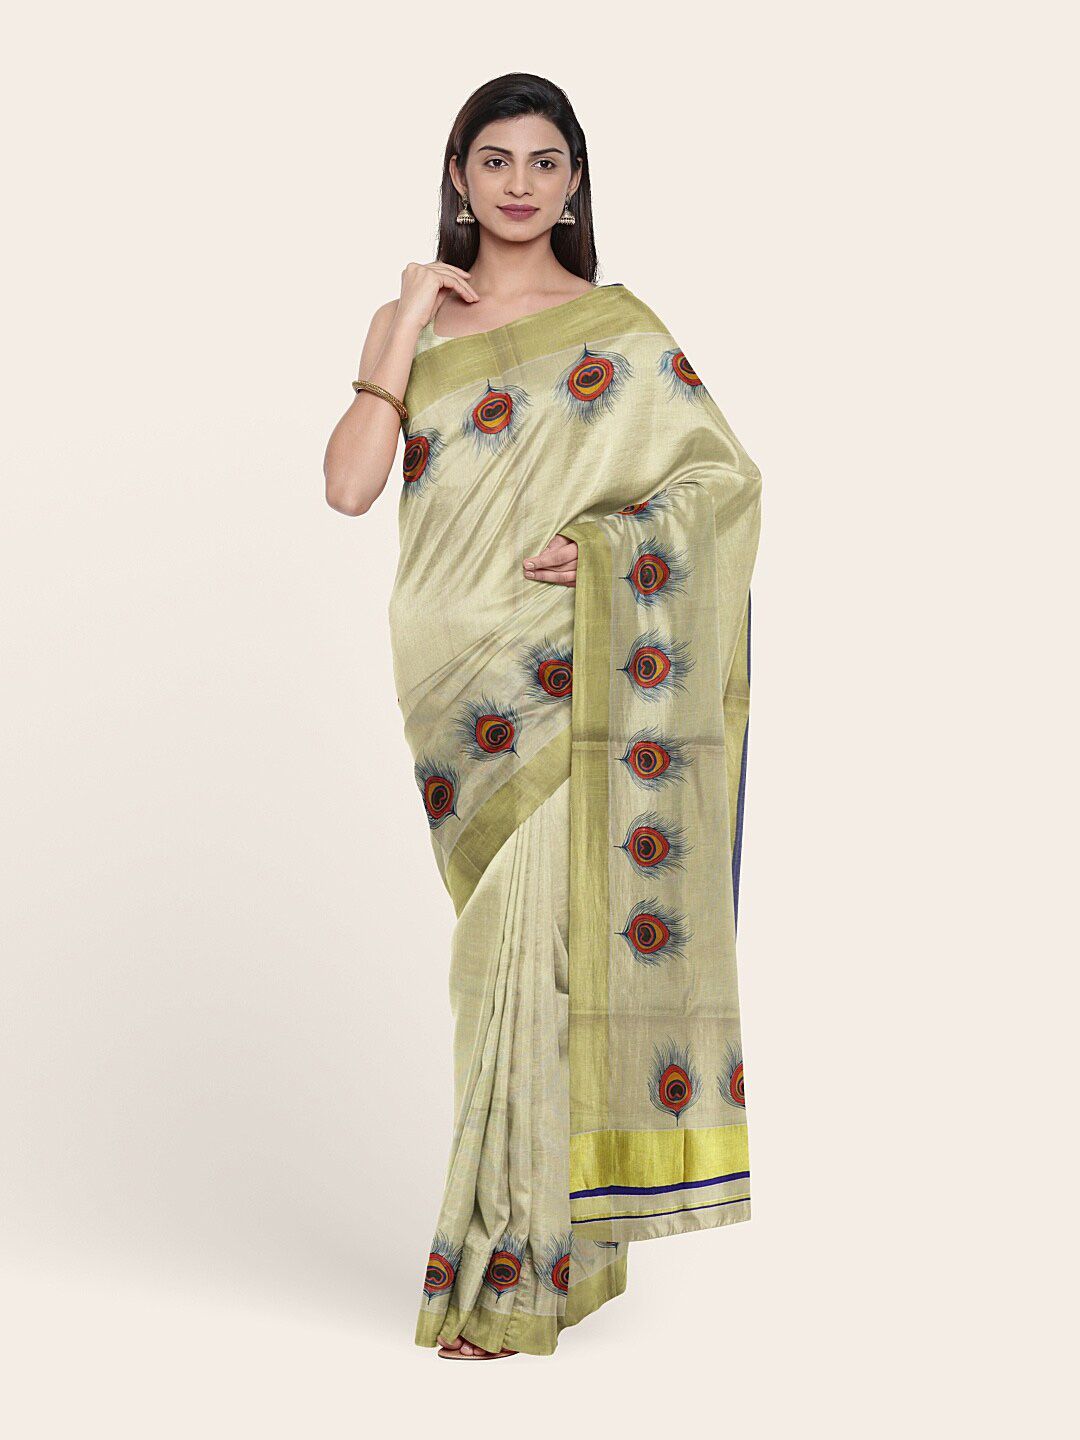 Pothys Gold-Toned & Yellow Ethnic Motifs Pure Cotton Saree Price in India